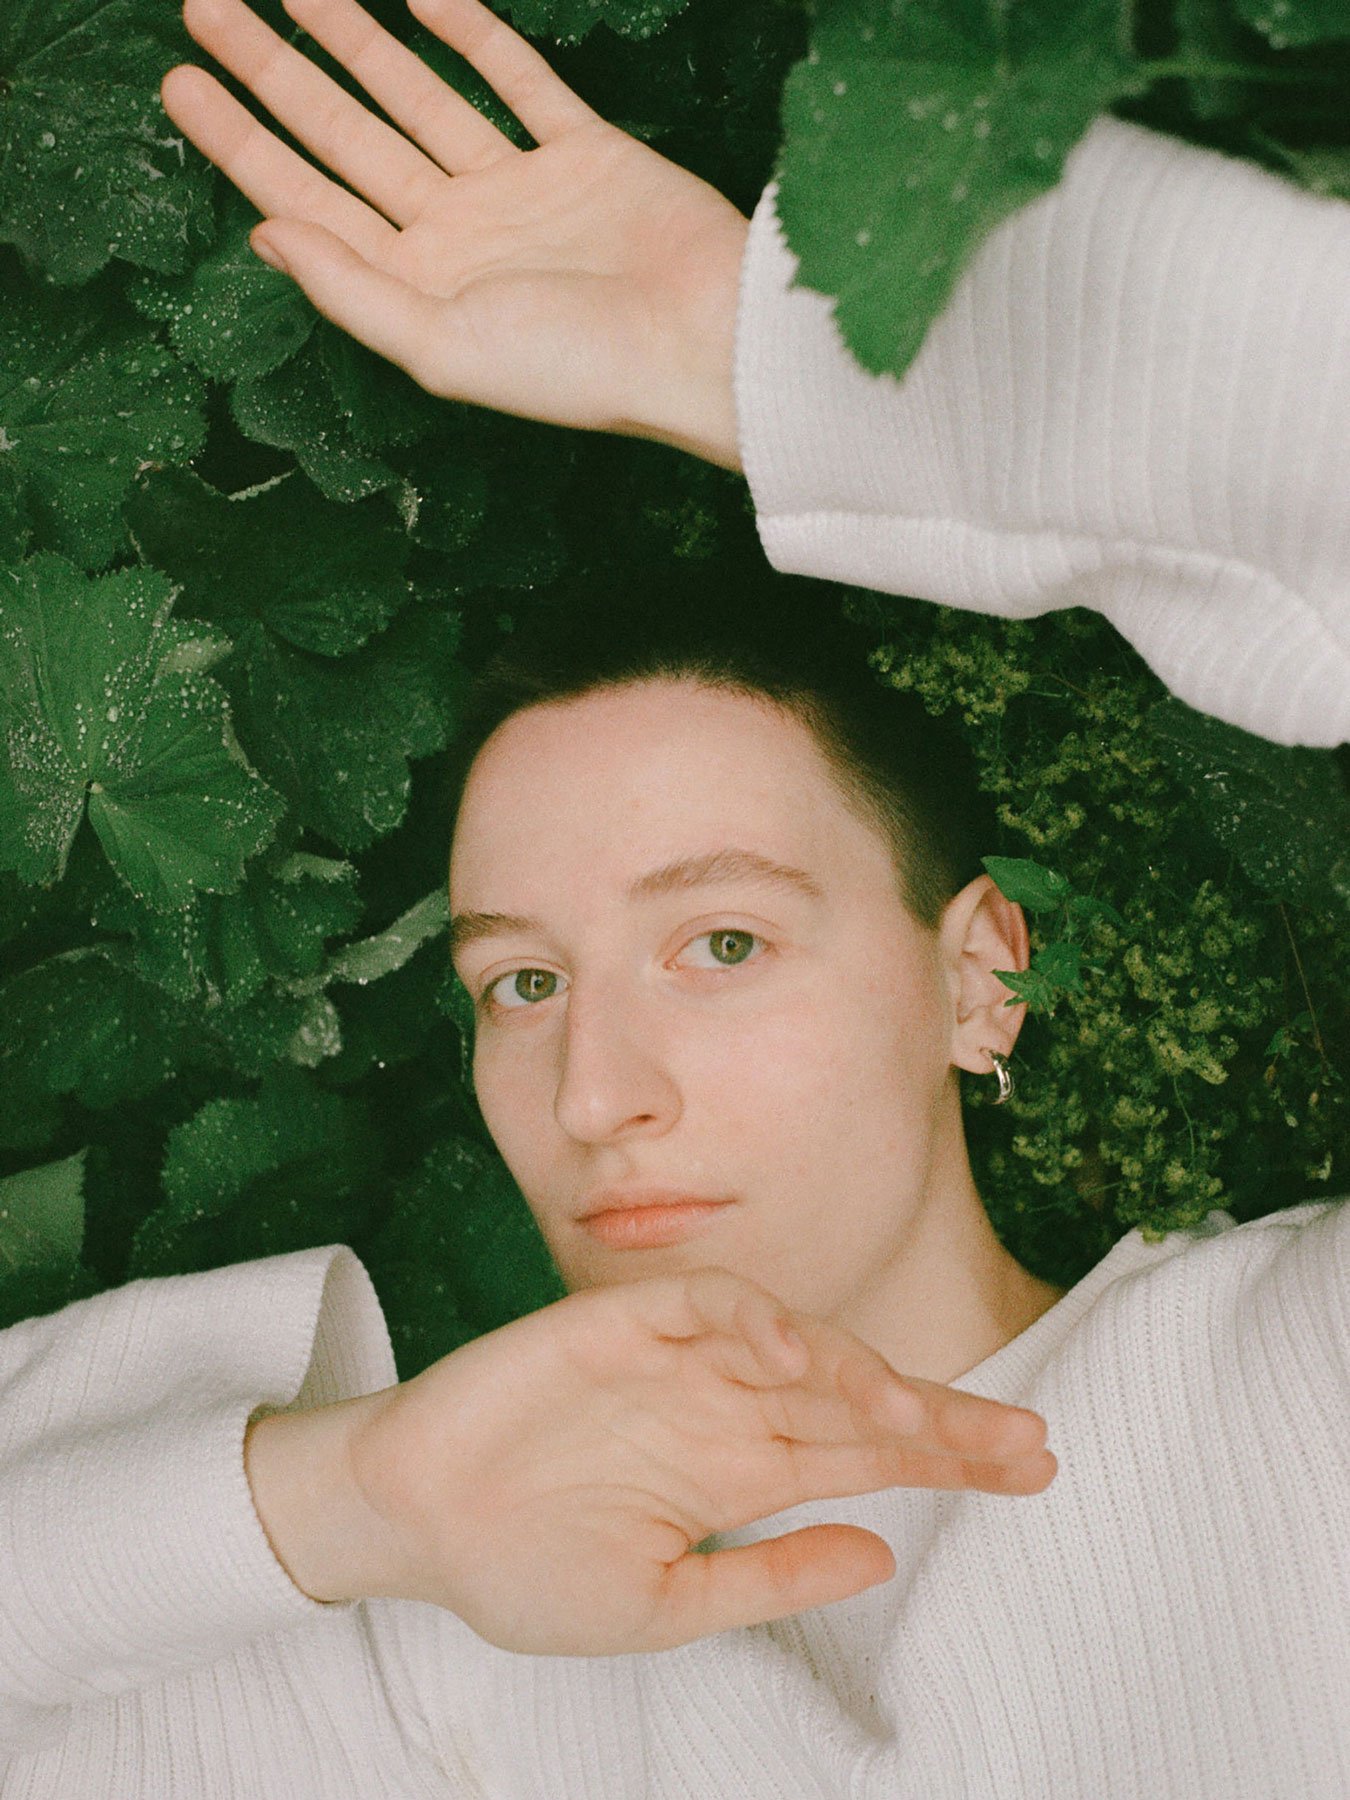 <p>The portrait of musician Hristina by Artem Emelianov is from a series about Russia’s non-binary community for O-zine, a self-funded online publication about Russian queer culture. The photographer has taken portraits in natural settings as an attempt to move away from the conventional binary take on portraiture. </p>